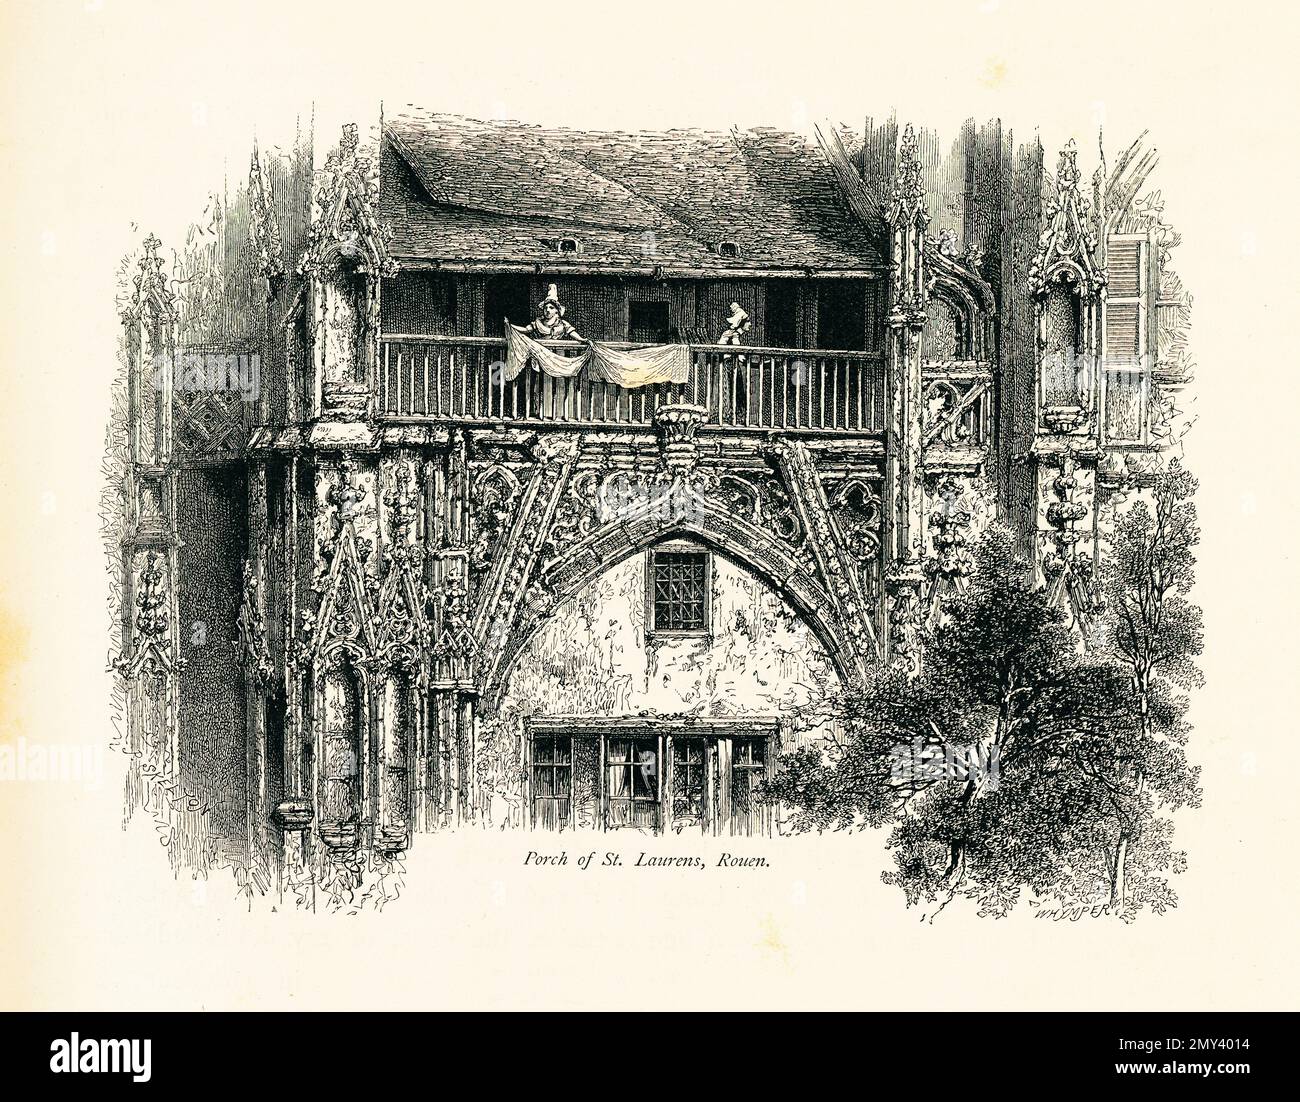 Antique engraving of the porch of St. Laurens Church in Rouen, Upper Normandy, France. Illustration published in Picturesque Europe, Vol. III (Cassell Stock Photo